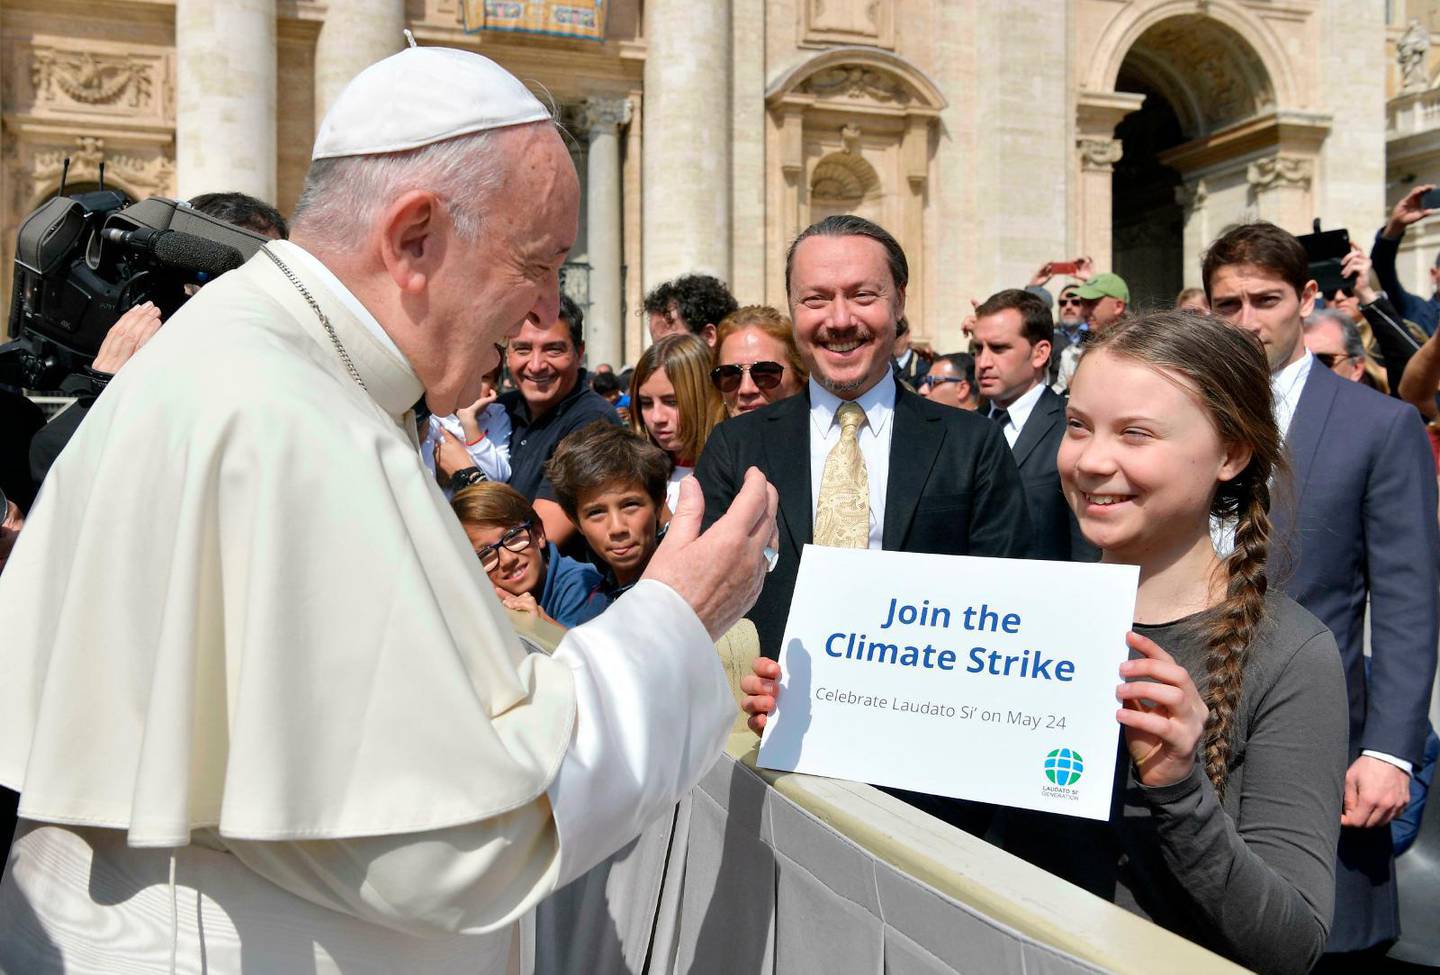 Swedish teenage environmental activist Greta Thunberg holds up a sign as Pope Francis greets her at the end of his weekly general audience, in St. Peter''s Square, at the Vatican, Wednesday, April 17, 2019. /thunberg has brought her climate change campaign to the Vatican, where she met with Pope Francis and carried a sign saying "Join the climate strike." (Vatican Media via AP)